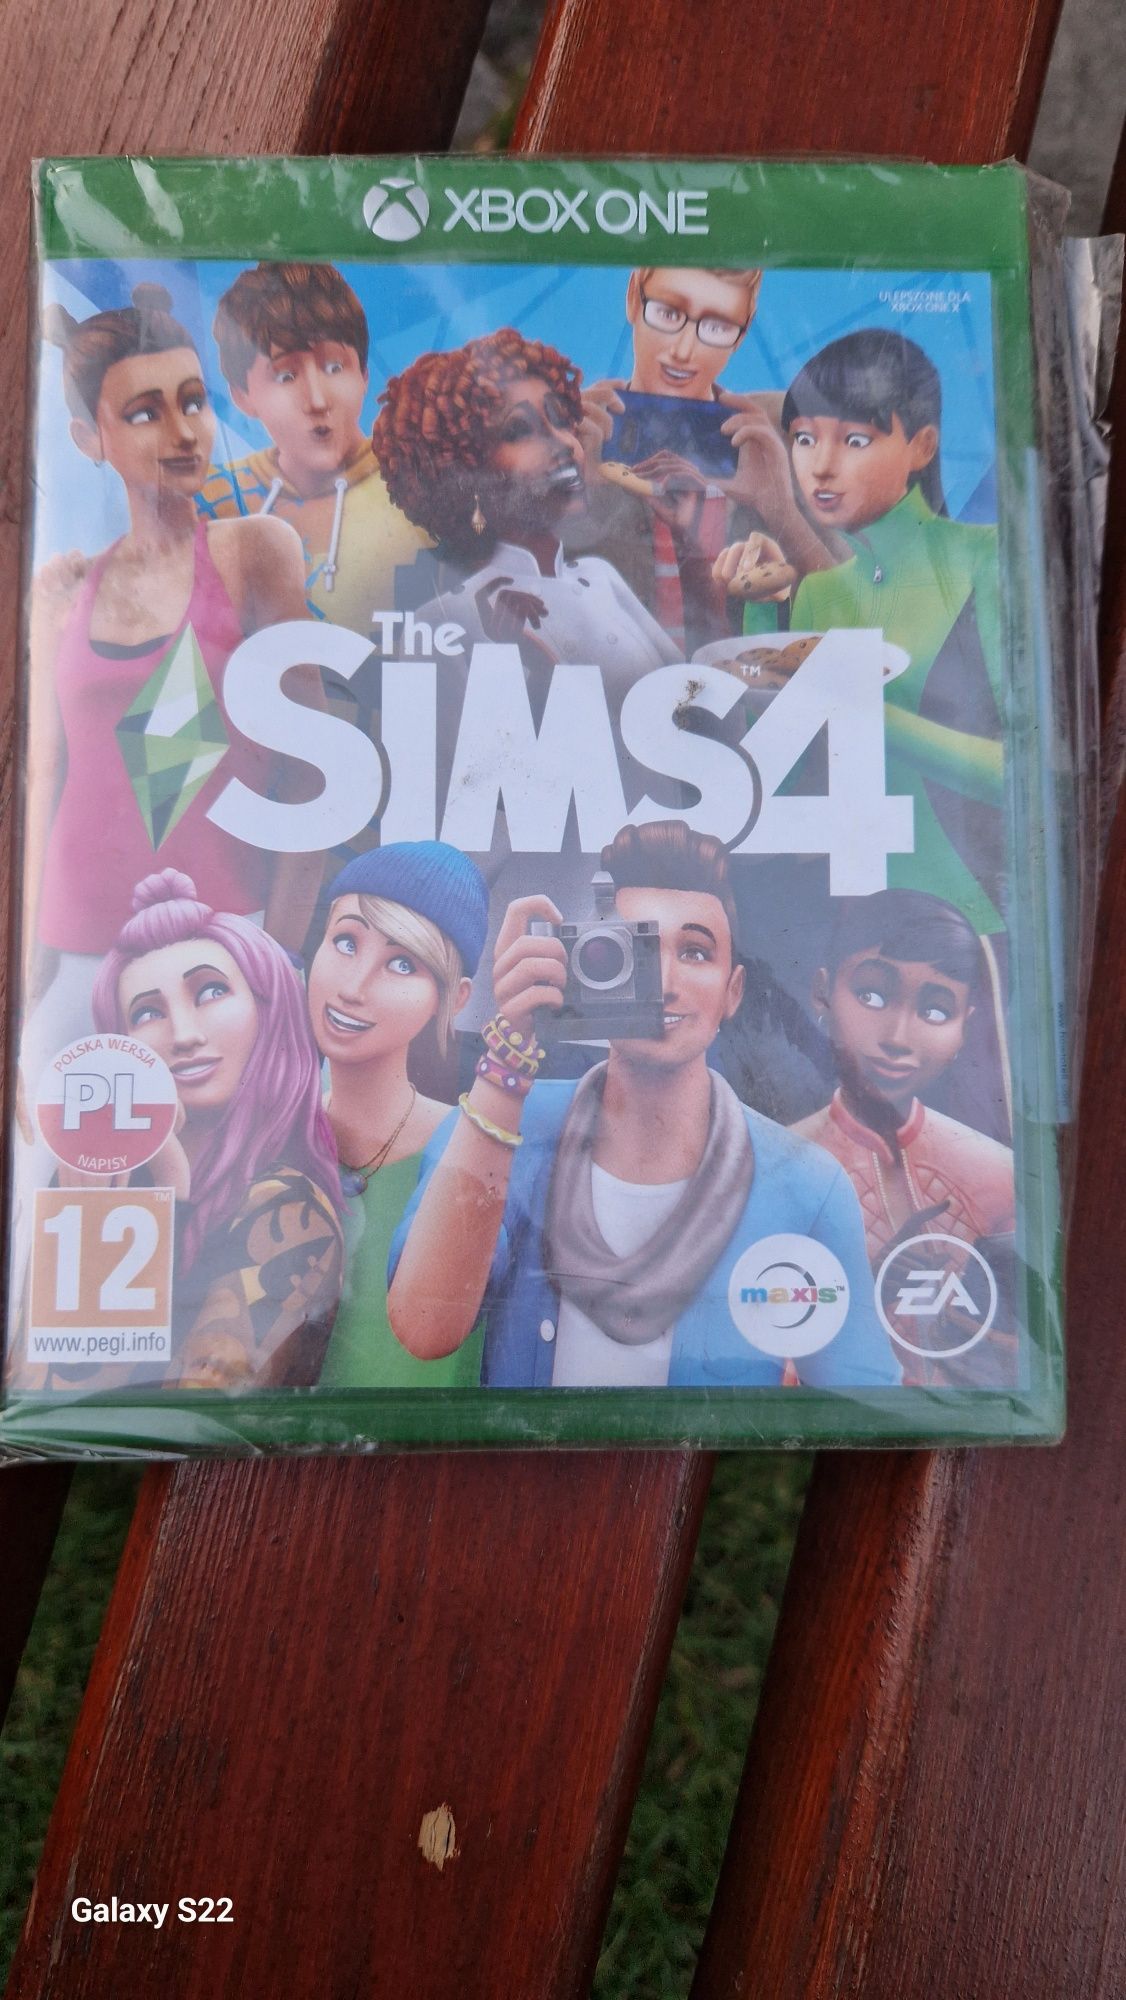 The sims 4 Xbox one